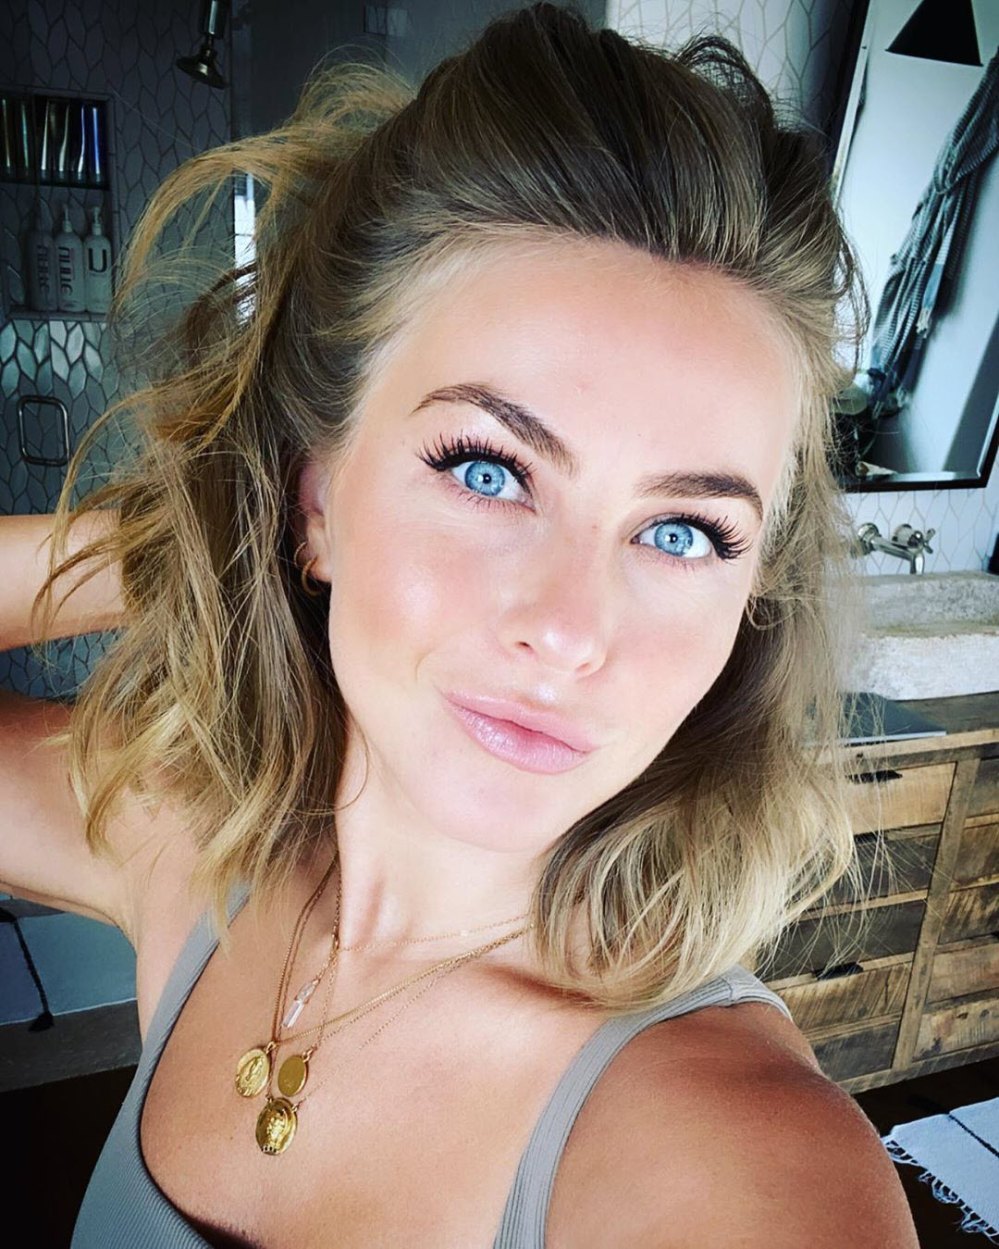 Julianne Hough Says Shes Happy Amid Brooks Laich Divorce